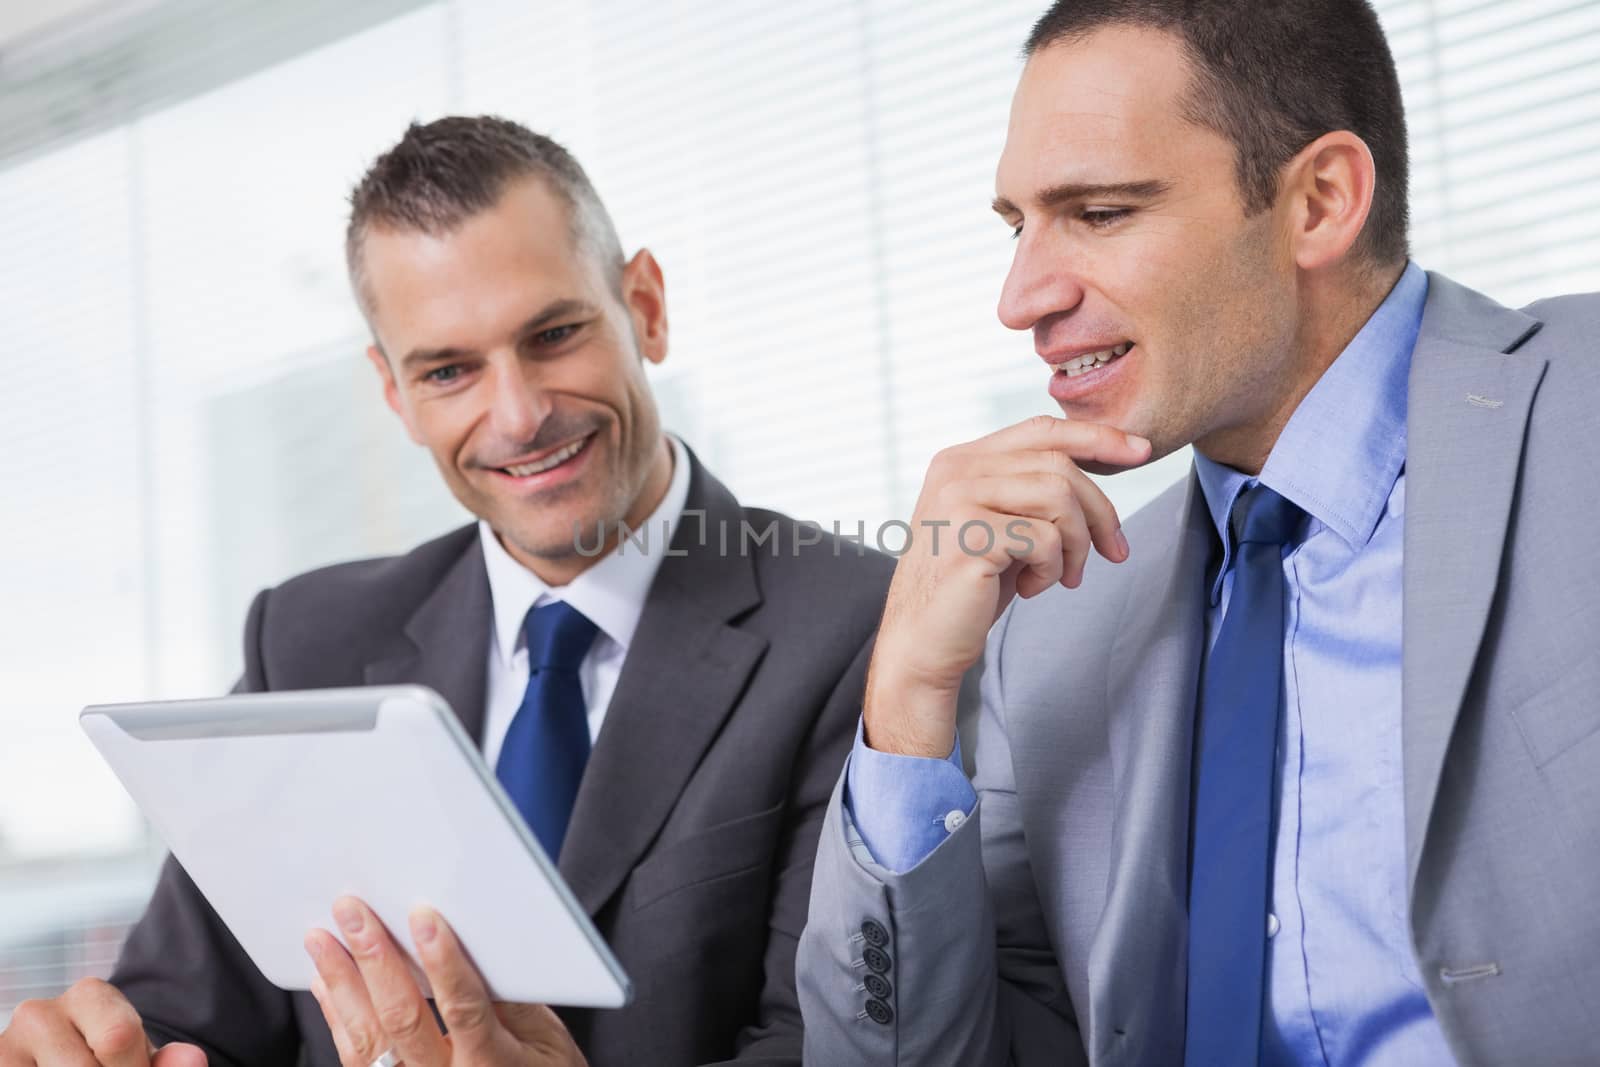 Smiling businessmen working together on their tablet in bright office